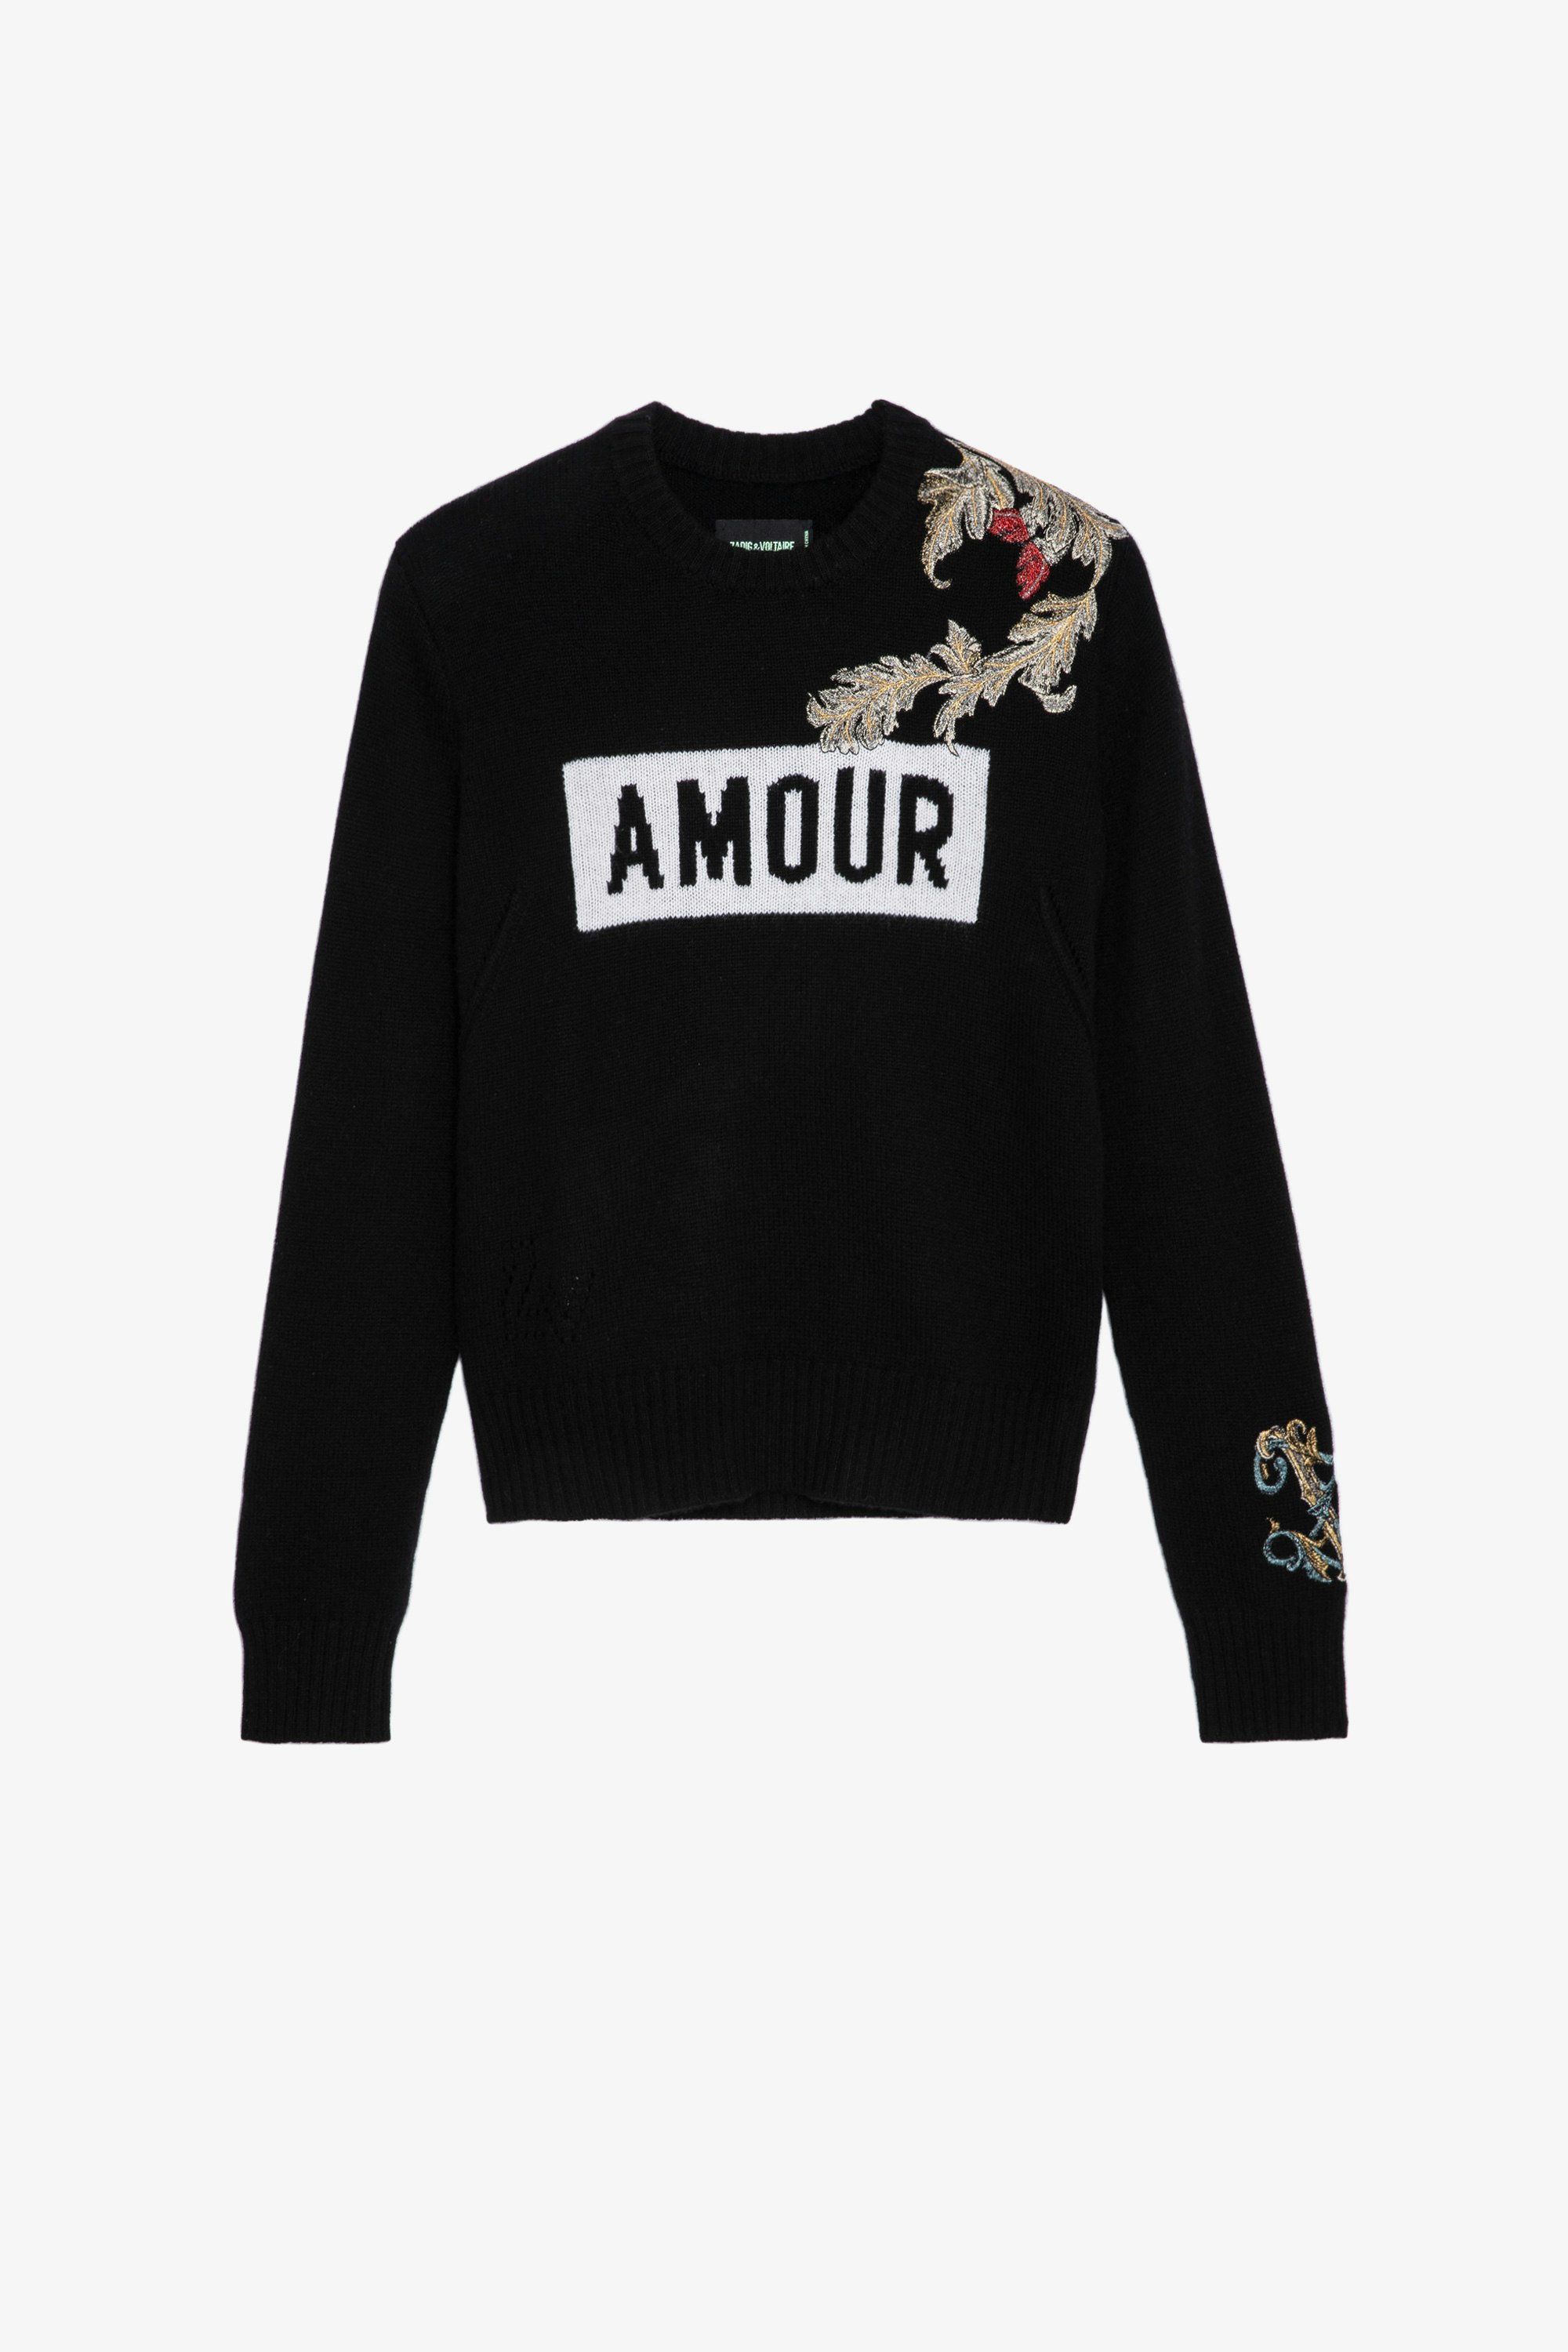 Life カシミヤ ニット Women’s black cashmere jumper with “Amour” slogan and floral motifs